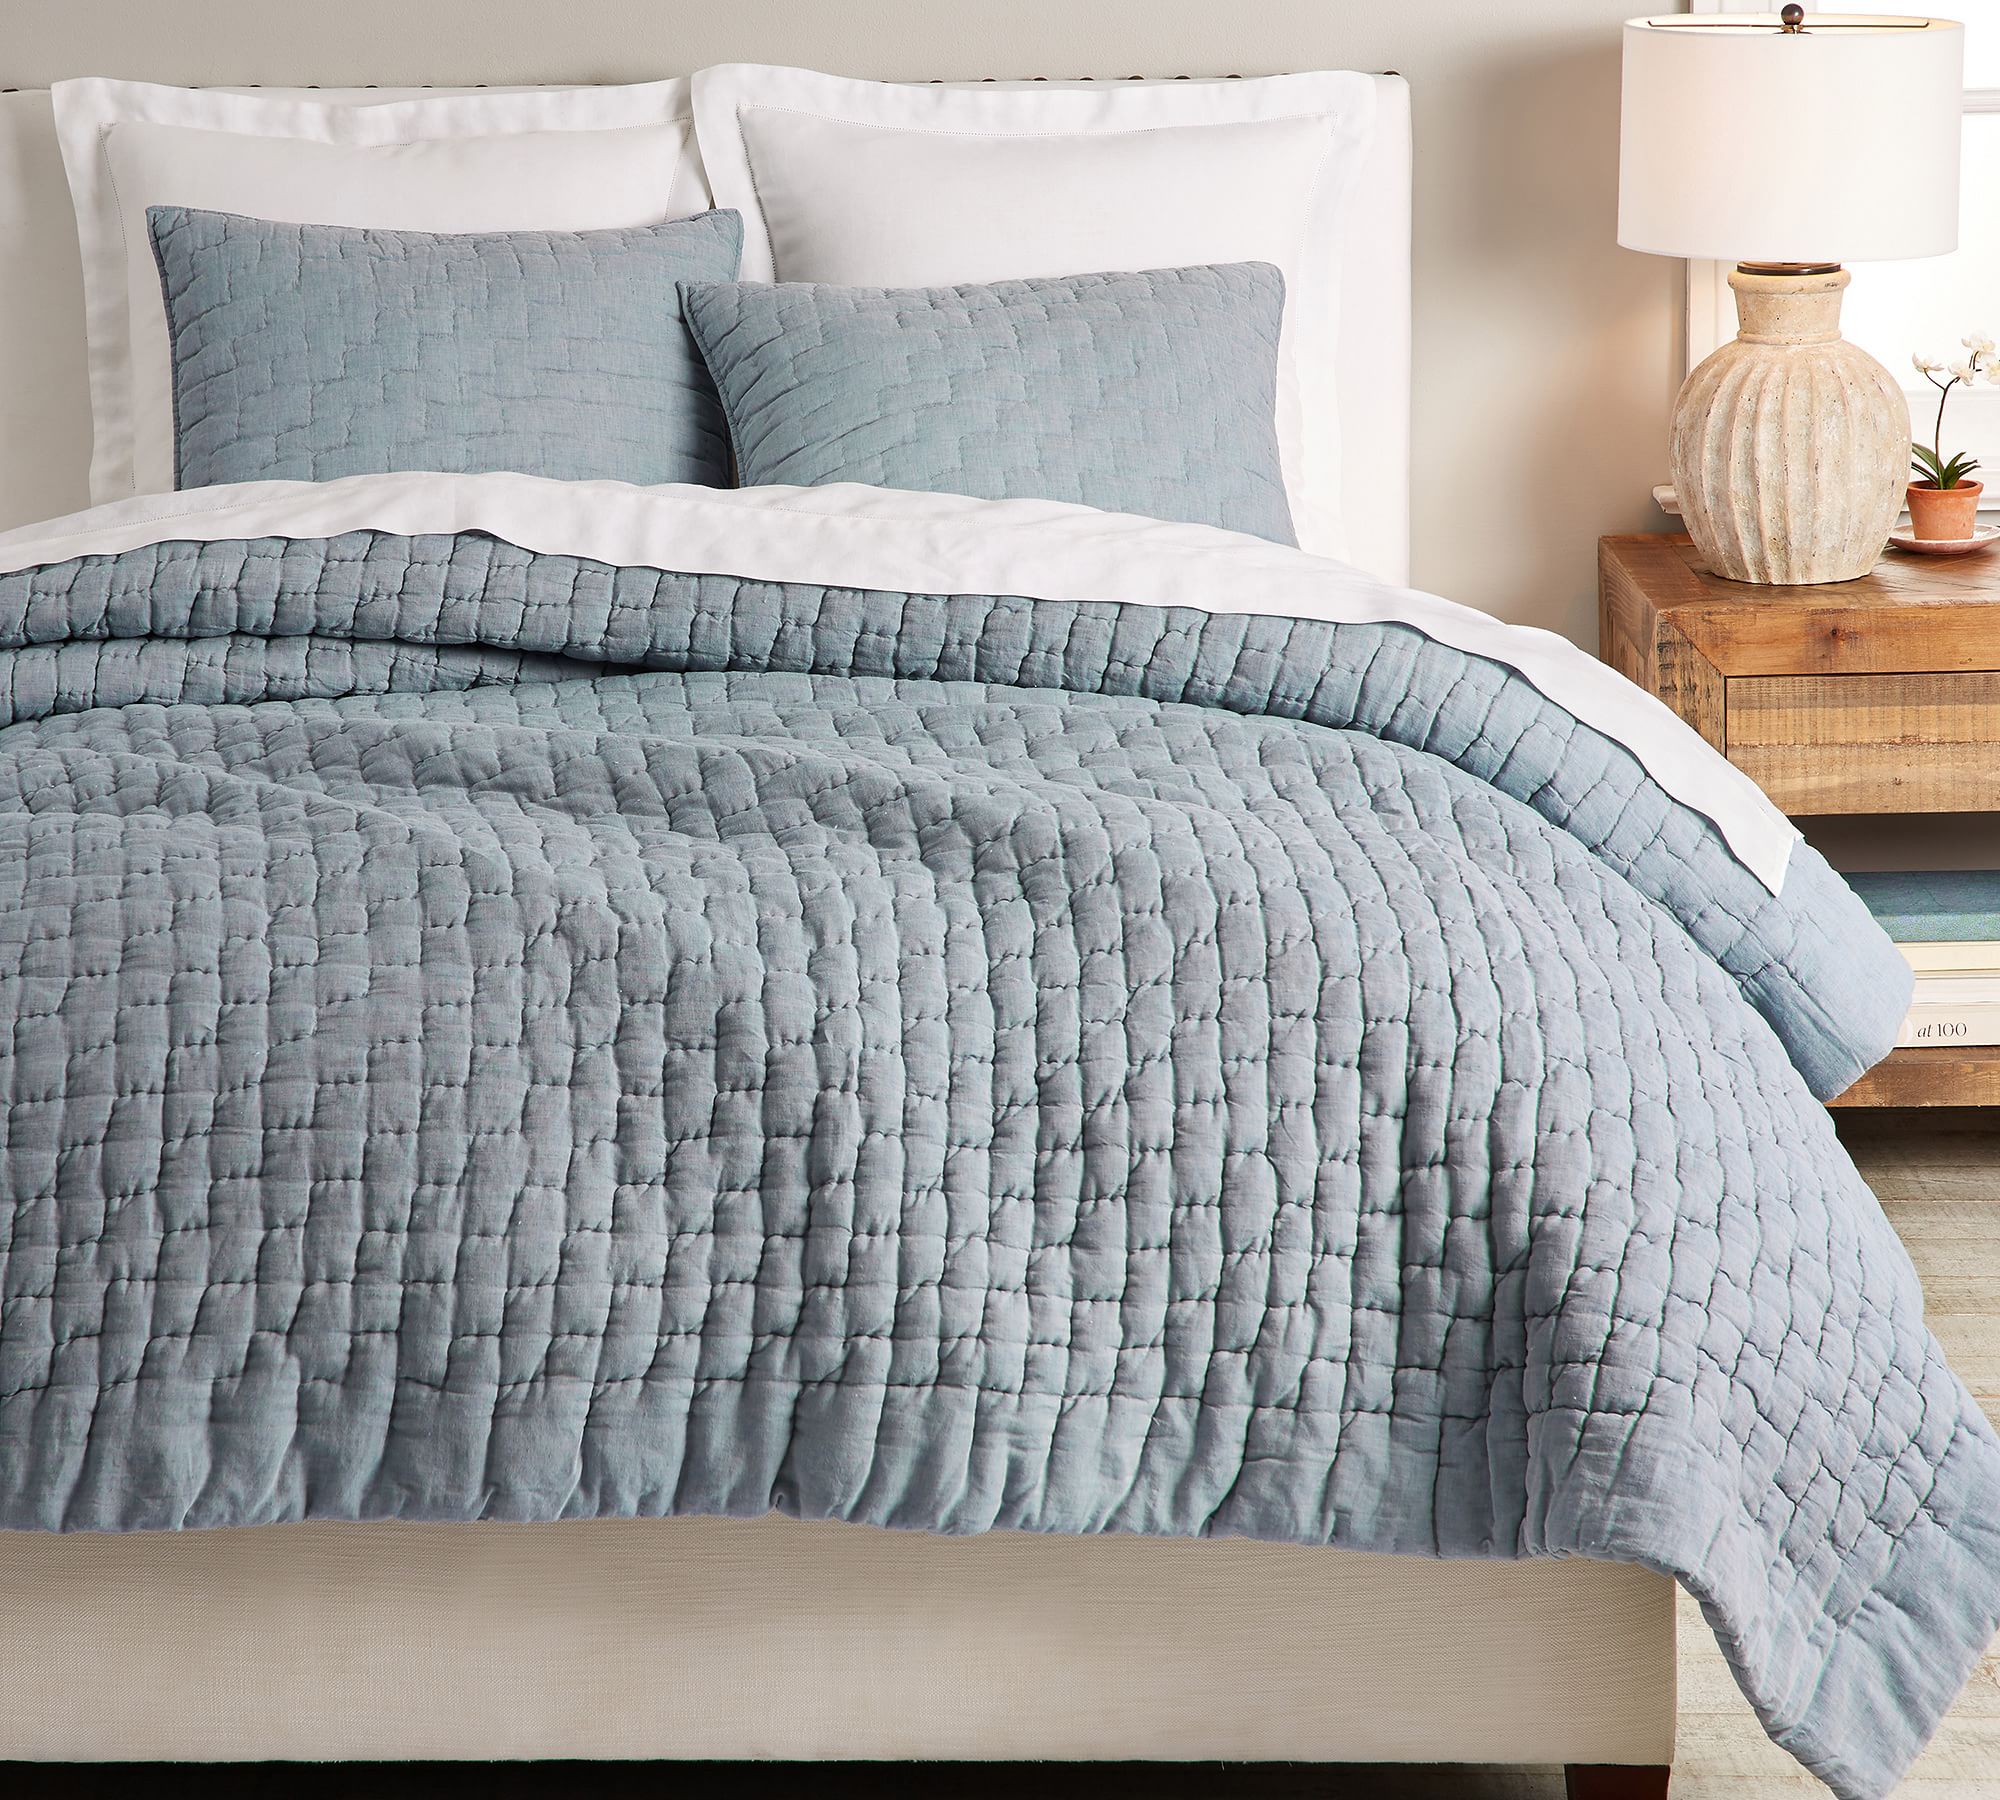 soft blue gray quilt mixed with white bedding